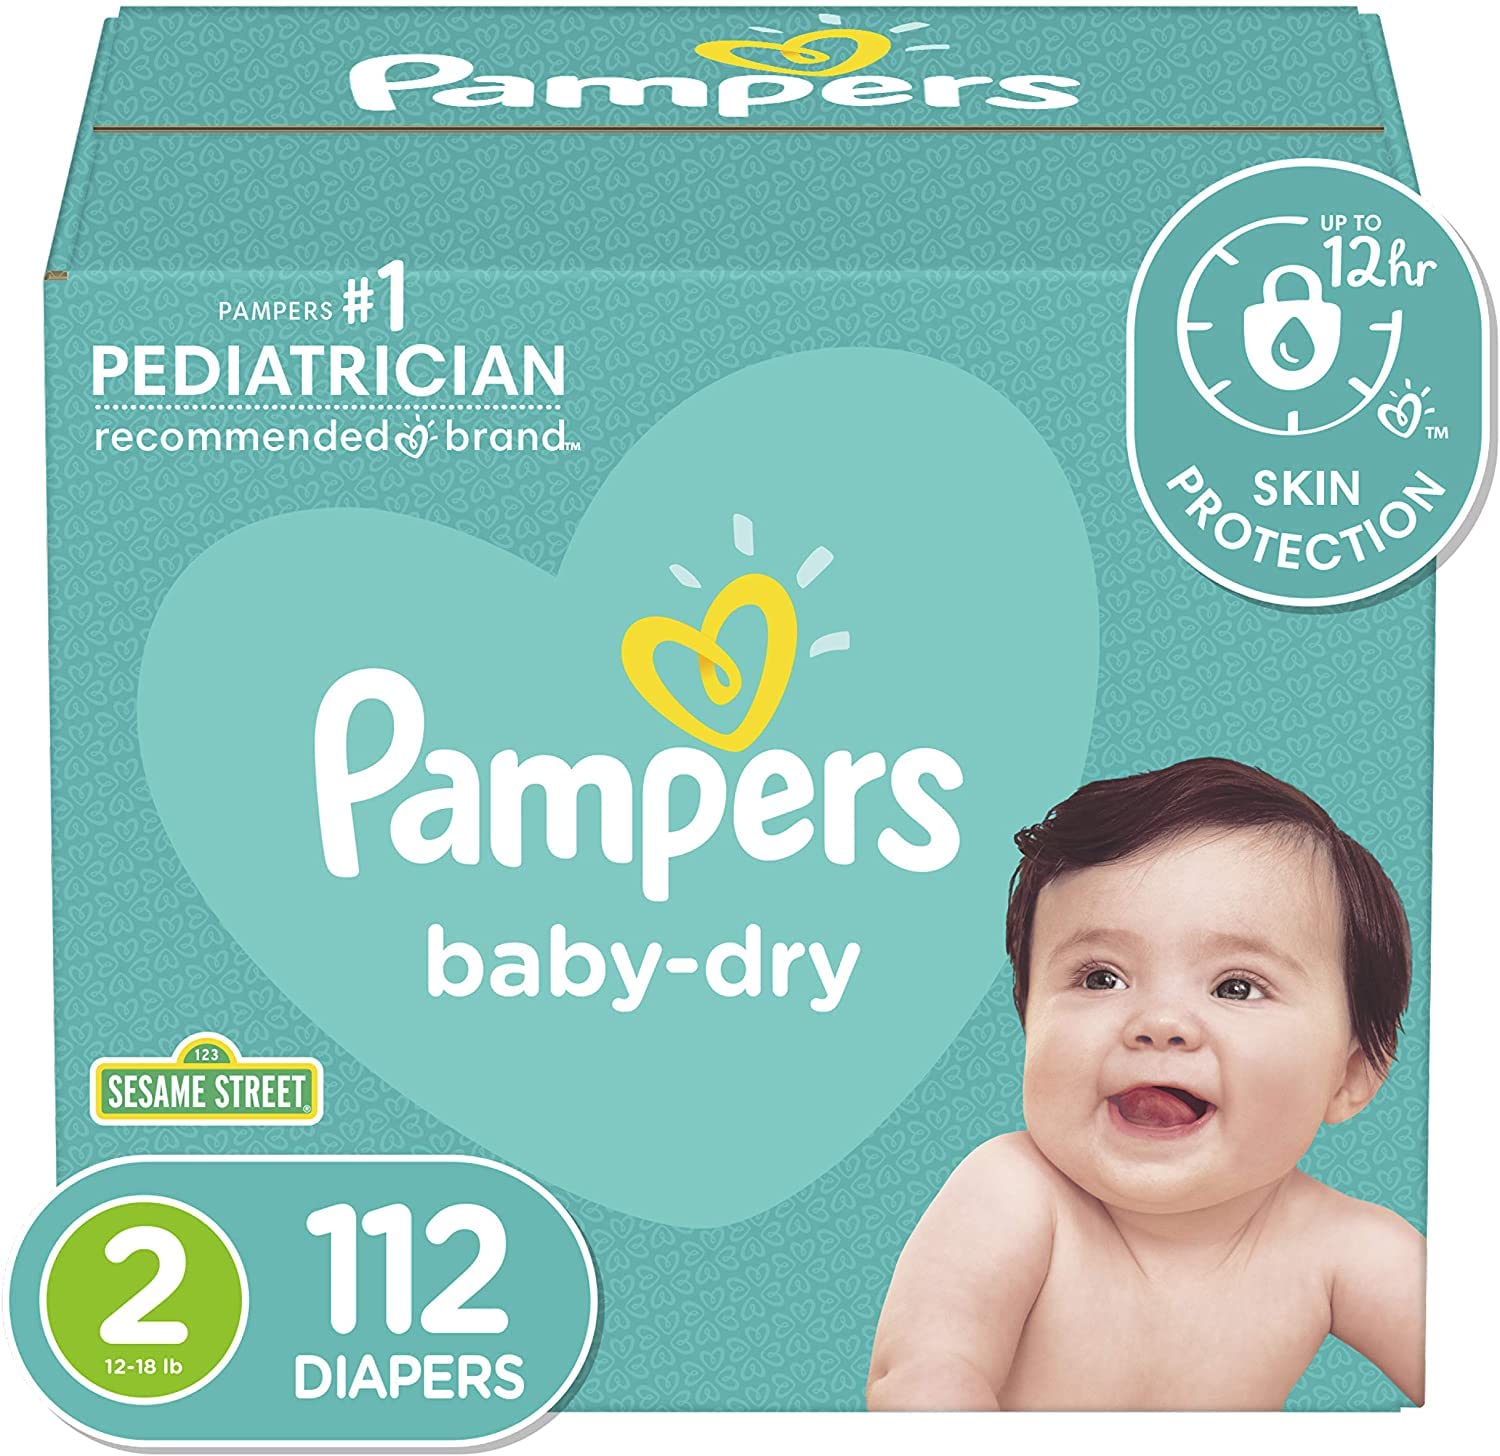 Pampers Baby Dry Diapers Size 2, 112 count - Disposable Diapers